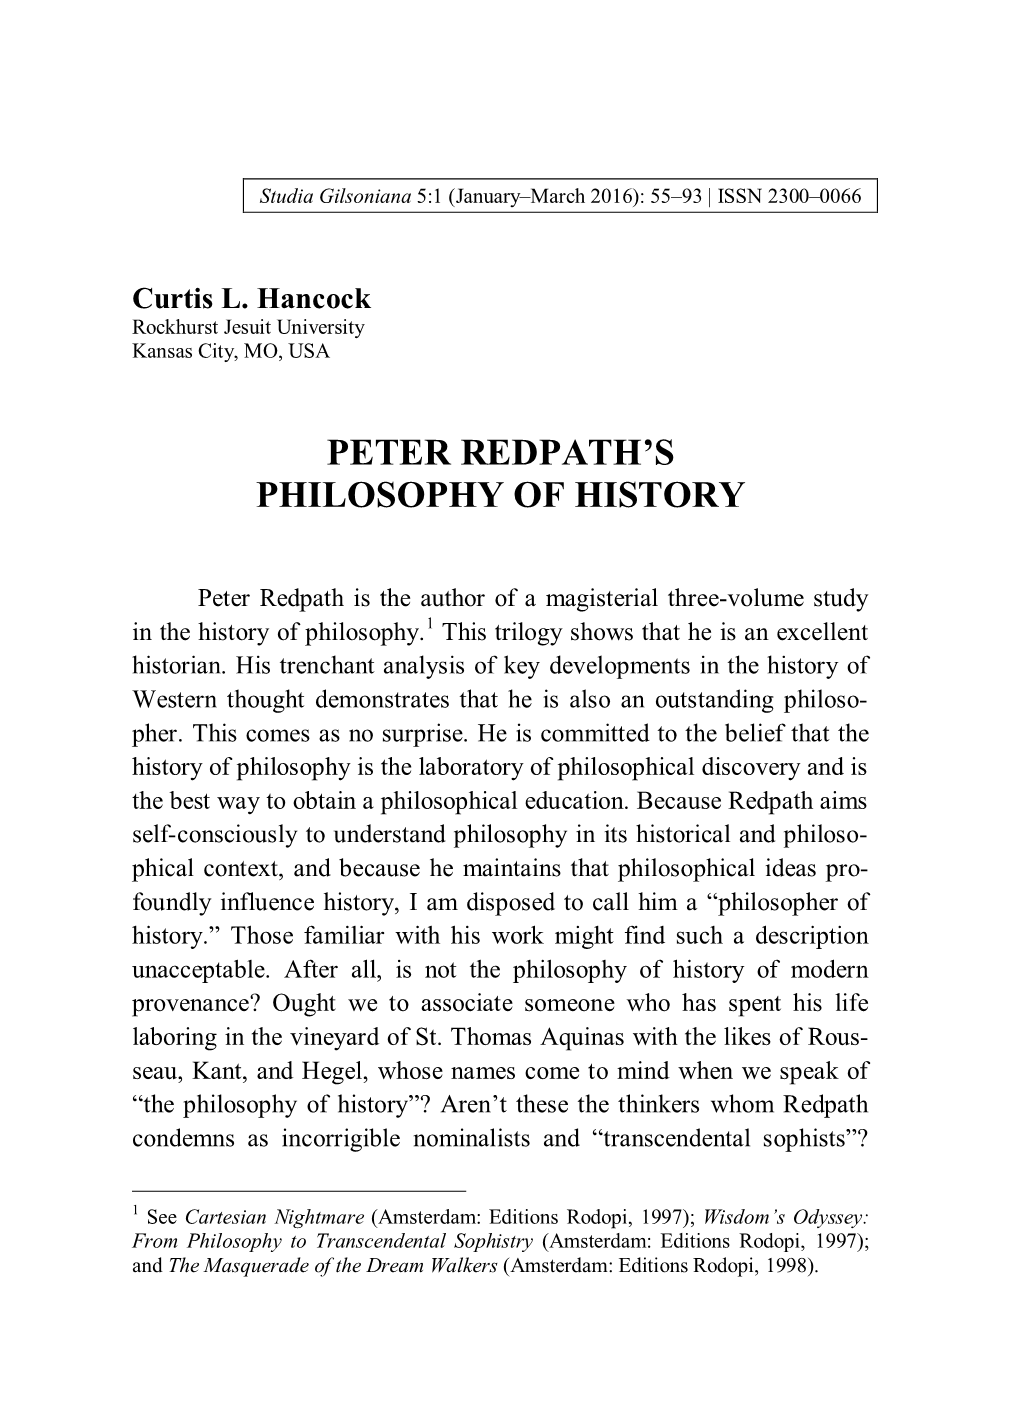 Peter Redpath's Philosophy of History